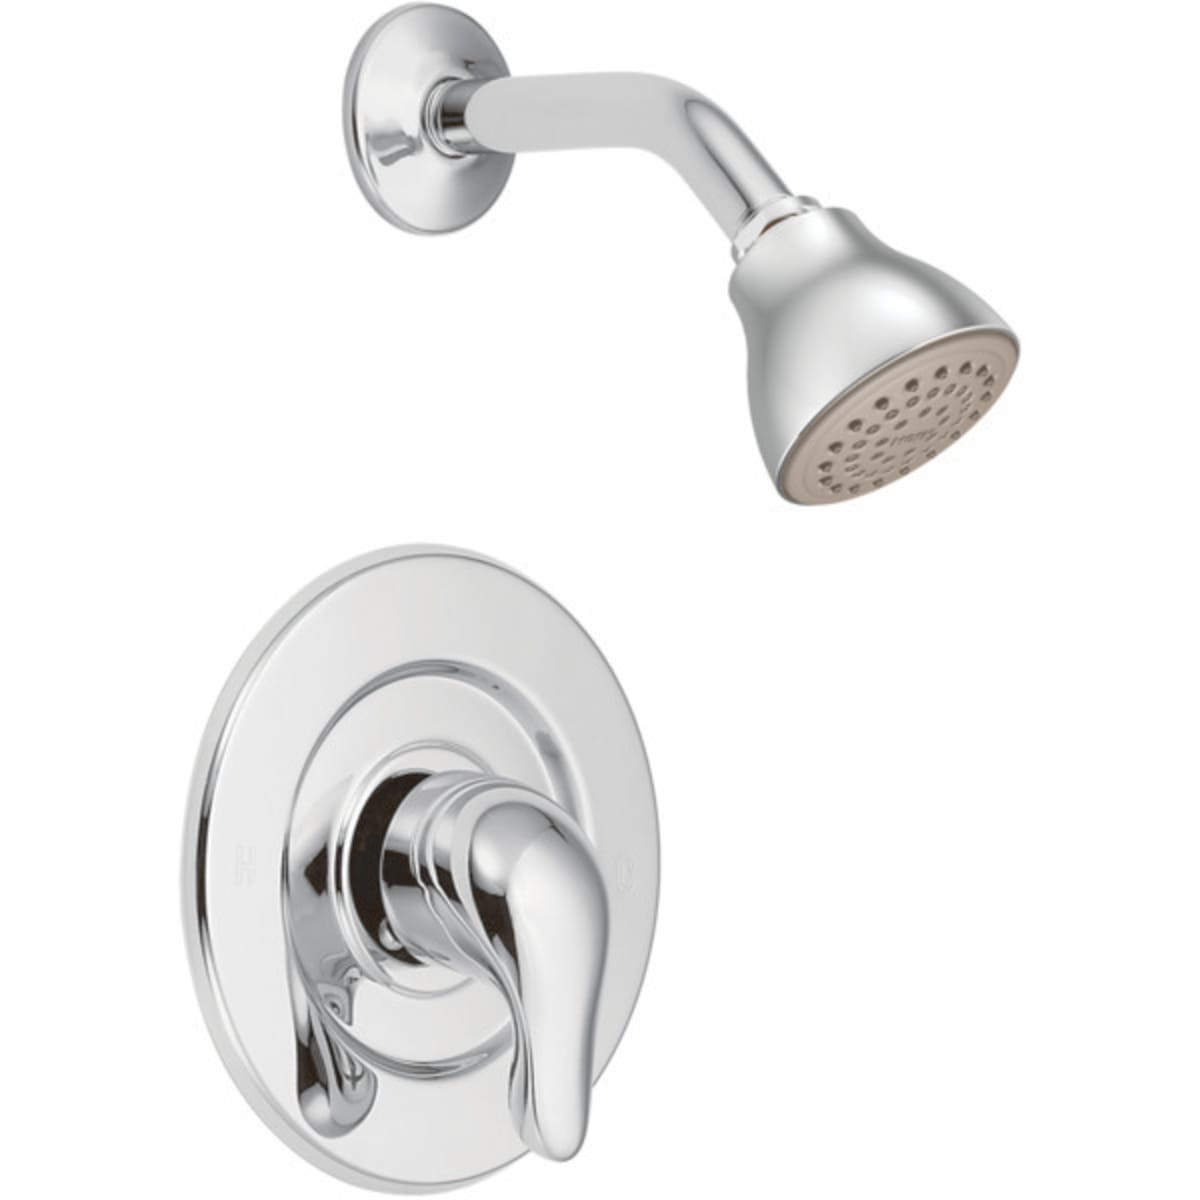 Tub Shower Faucets Hd Supply